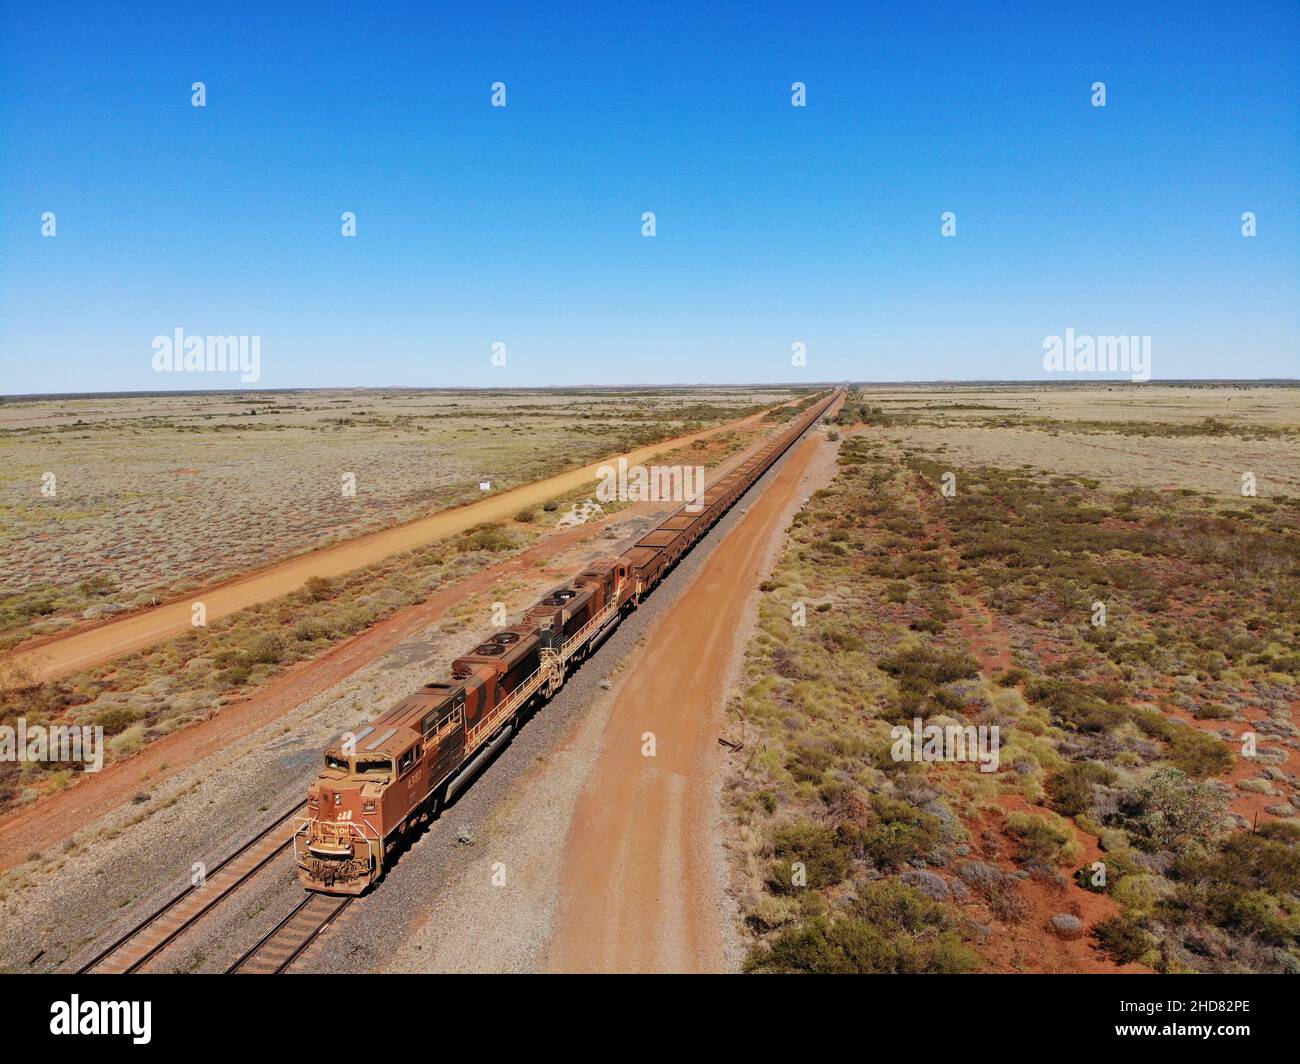 Created by dji camera, a Iron Ore Train in the Pilbara near to Port Hedland on Fortescue Railway Stock Photo